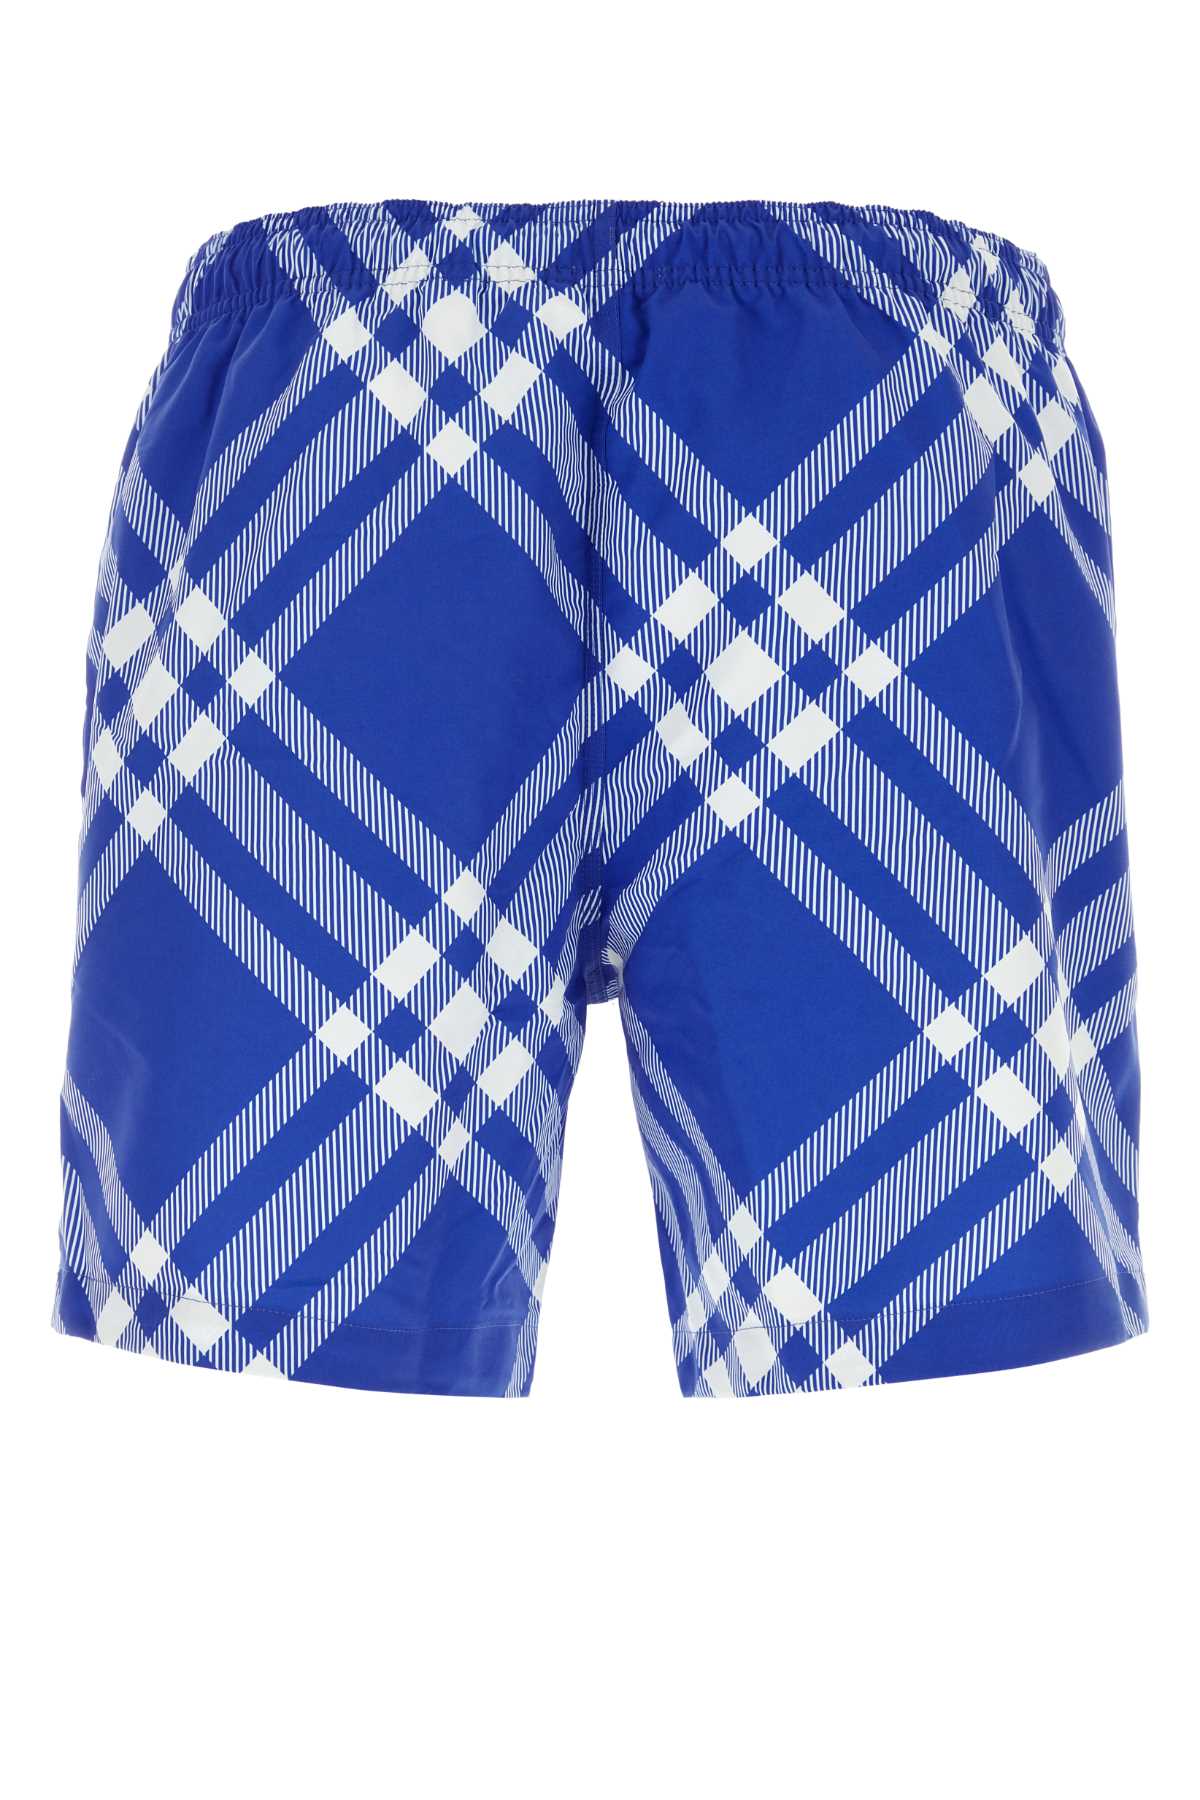 Shop Burberry Printed Polyester Swimming Shorts In Knight